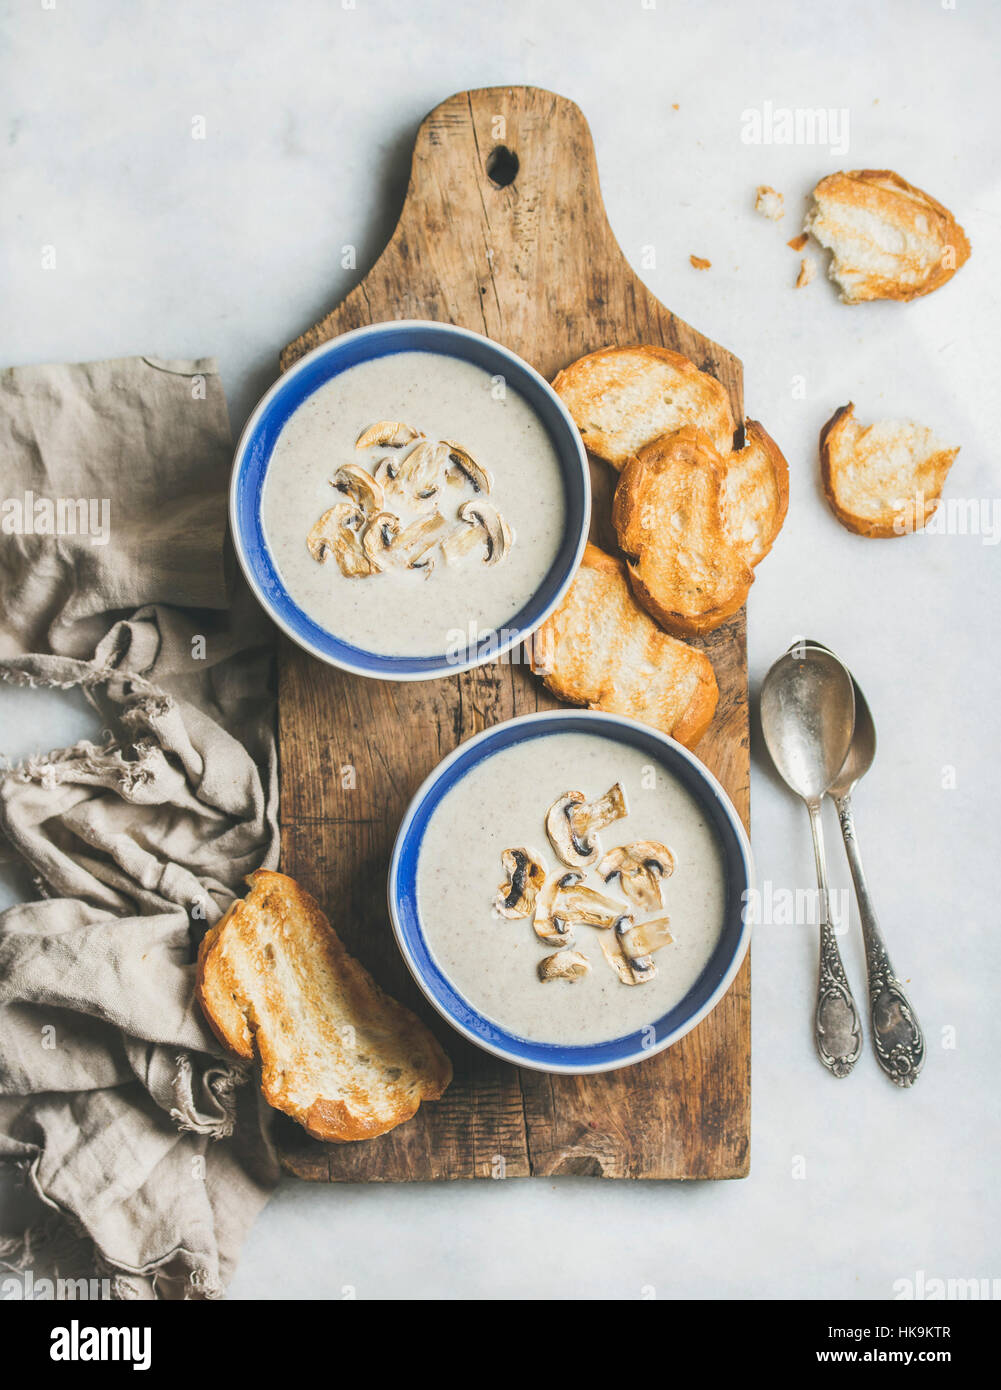 Creamy mushroom soup in bowls with toasted bread slices on rustic serving board over grey marble background, top view, selective focus Stock Photo